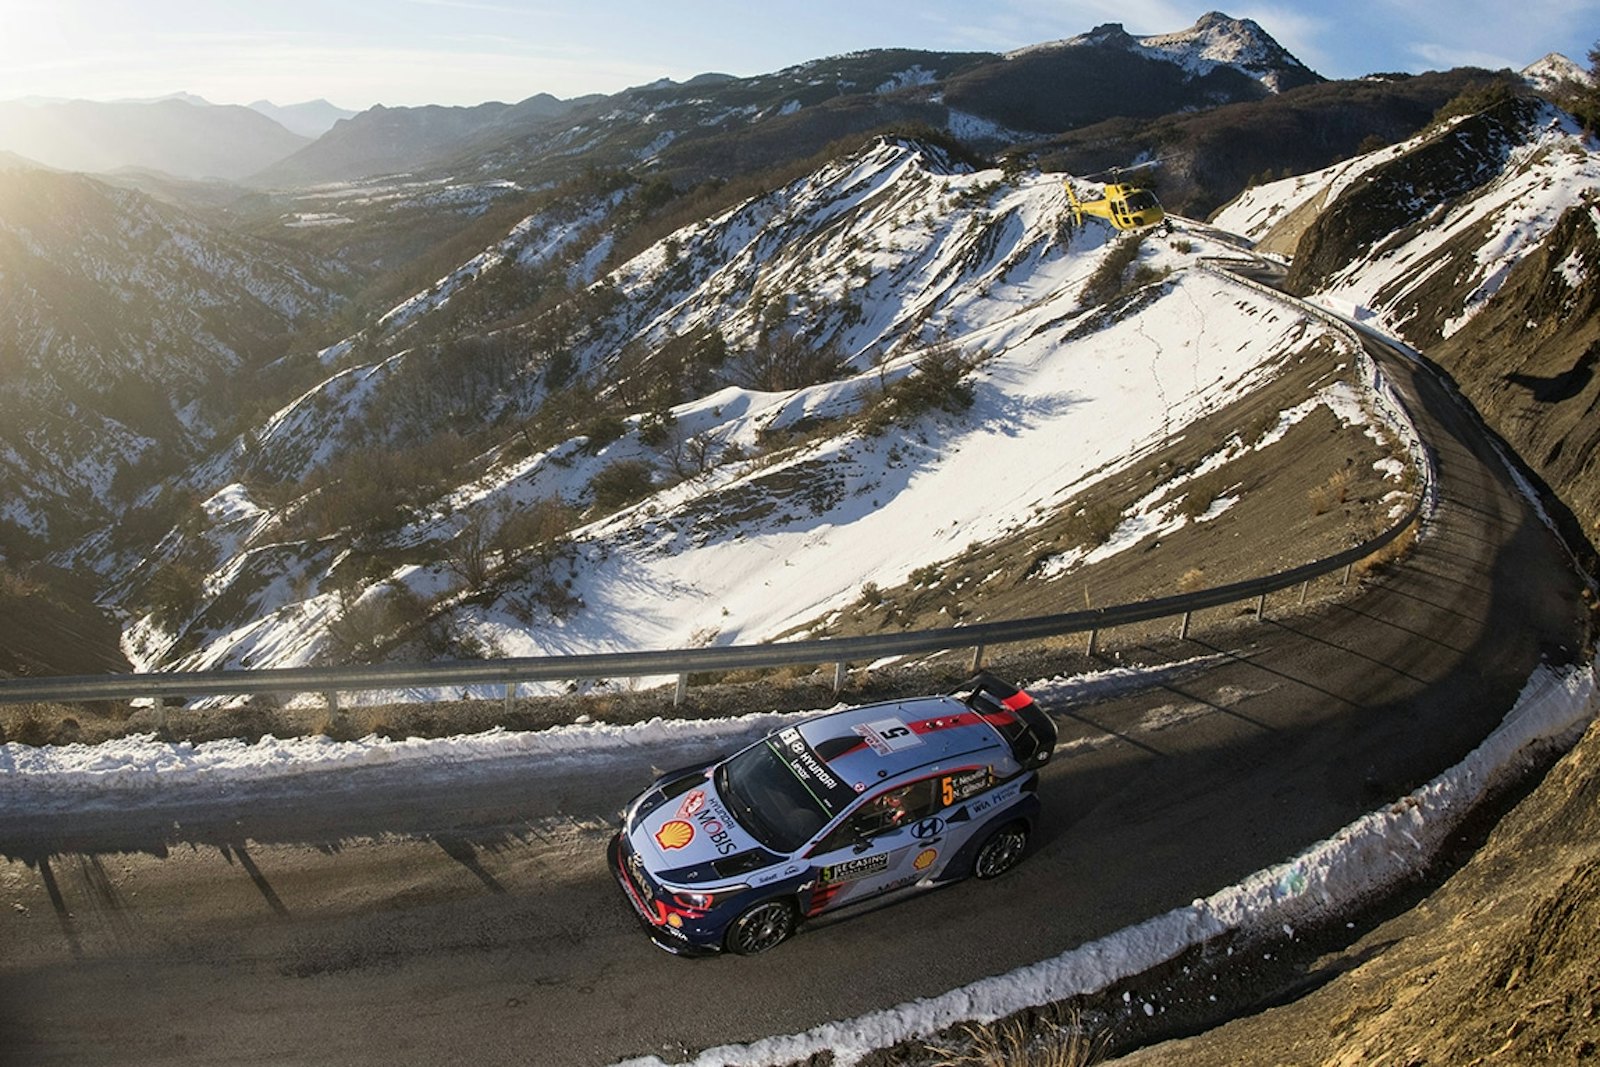 Thierry Neuville (BEL) competes during the FIA World Rally Championship 2017 in Monte Carlo, Monaco on January 21, 2017 // Jaanus Ree/Red Bull Content Pool // P-20170122-00696 // Usage for editorial use only // Please go to www.redbullcontentpool.com for further information. //